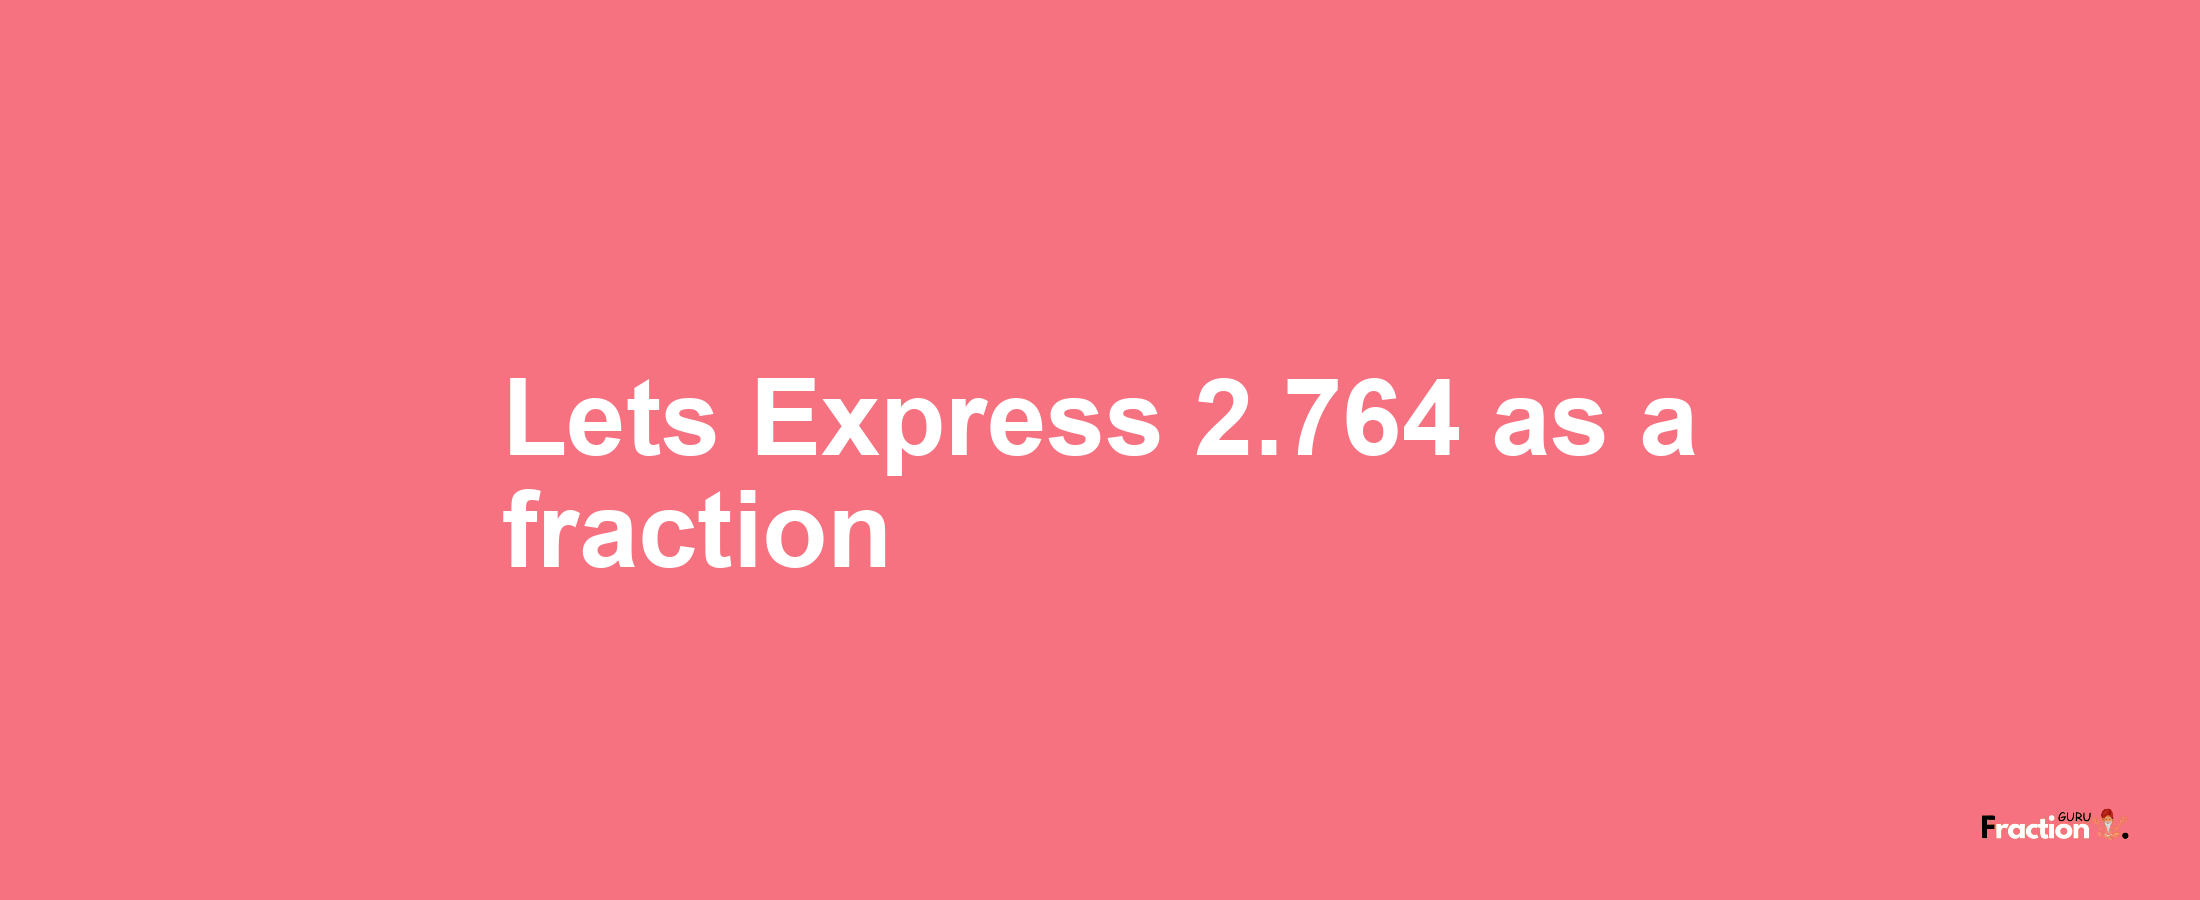 Lets Express 2.764 as afraction